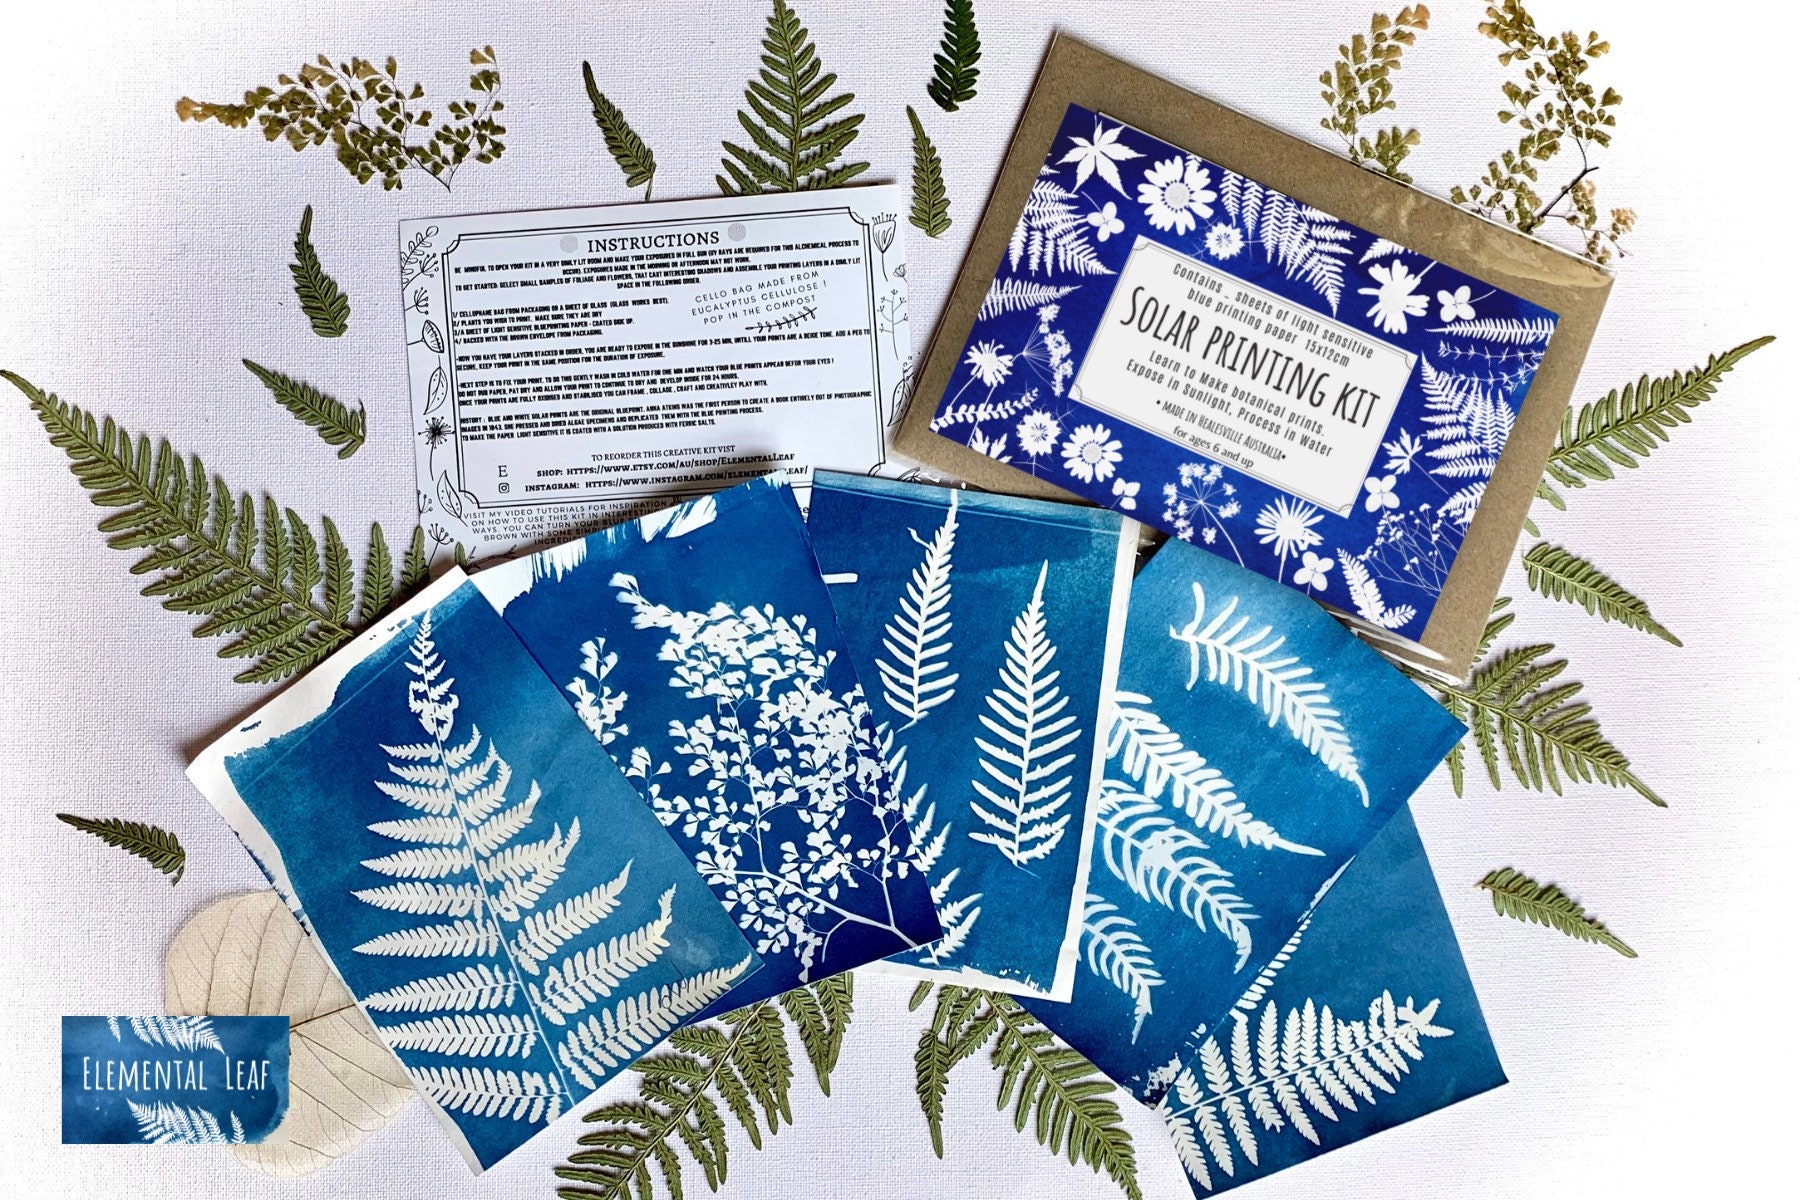 15 Sheet Sunprint Paper Kit Cyanotype Paper, Solar Drawing Paper and 15  Pouch Self Adhesive Sealing Plastic Bags for Kids and Adults to Arts DIY